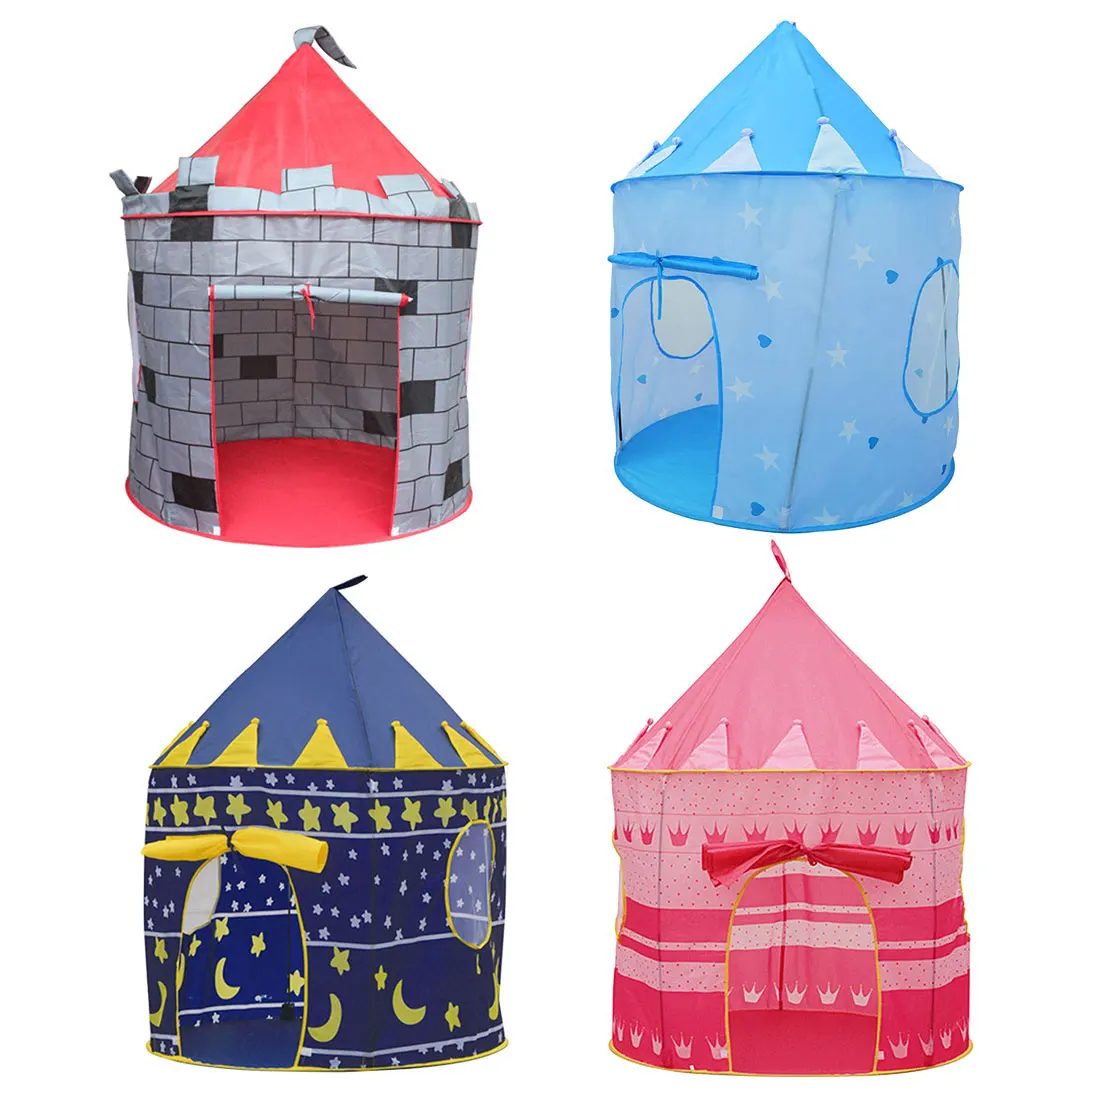 4 Colors Play Tent Portable Foldable Tipi Prince Folding Tent Children Boy Castle Cubby Play House Kids Gifts Outdoor Toy Tents